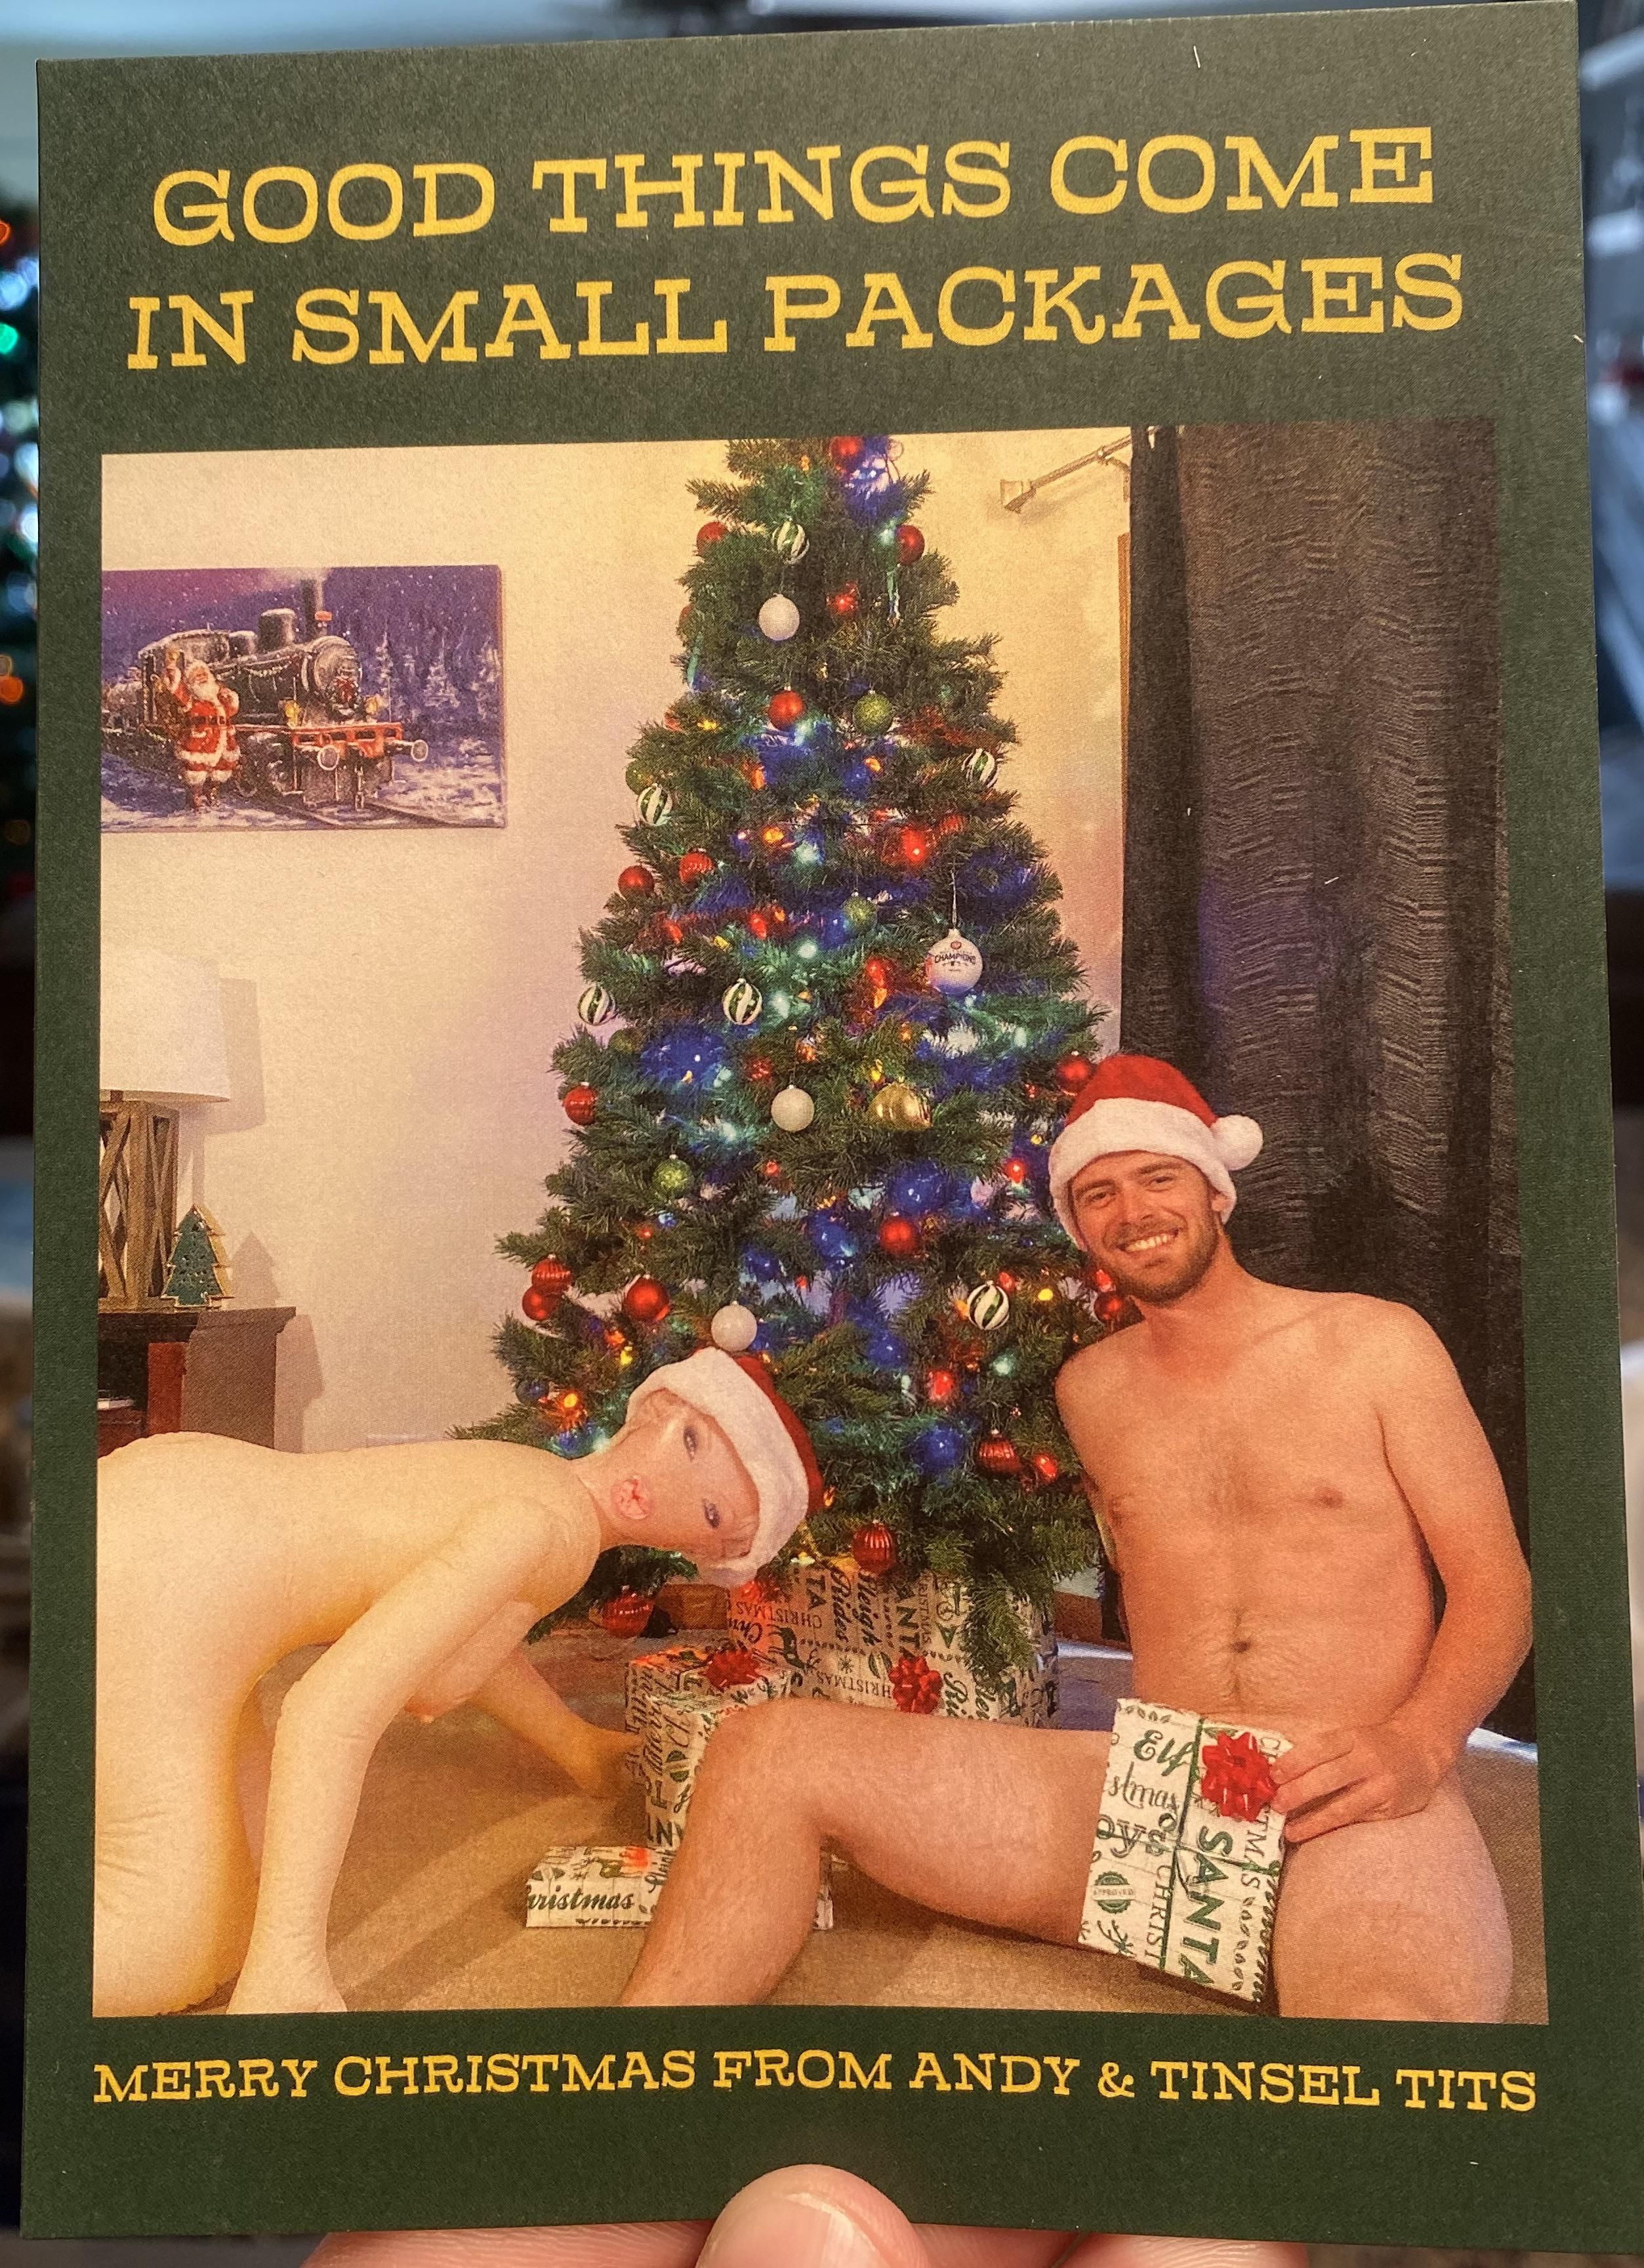 My Christmas card this year!